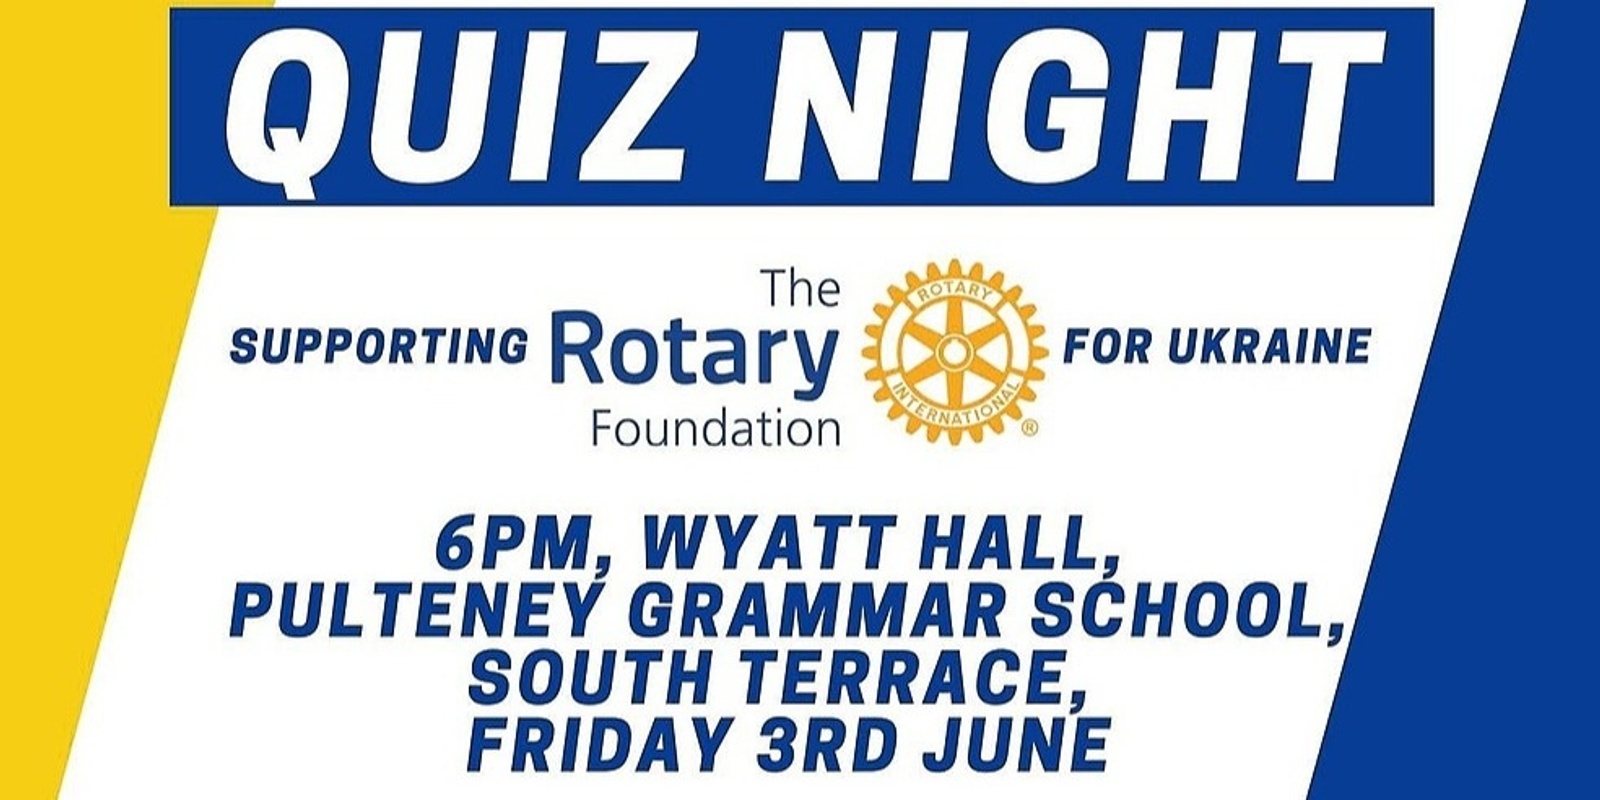 Banner image for Quiz Night Supporting the Rotary Foundation for Ukraine